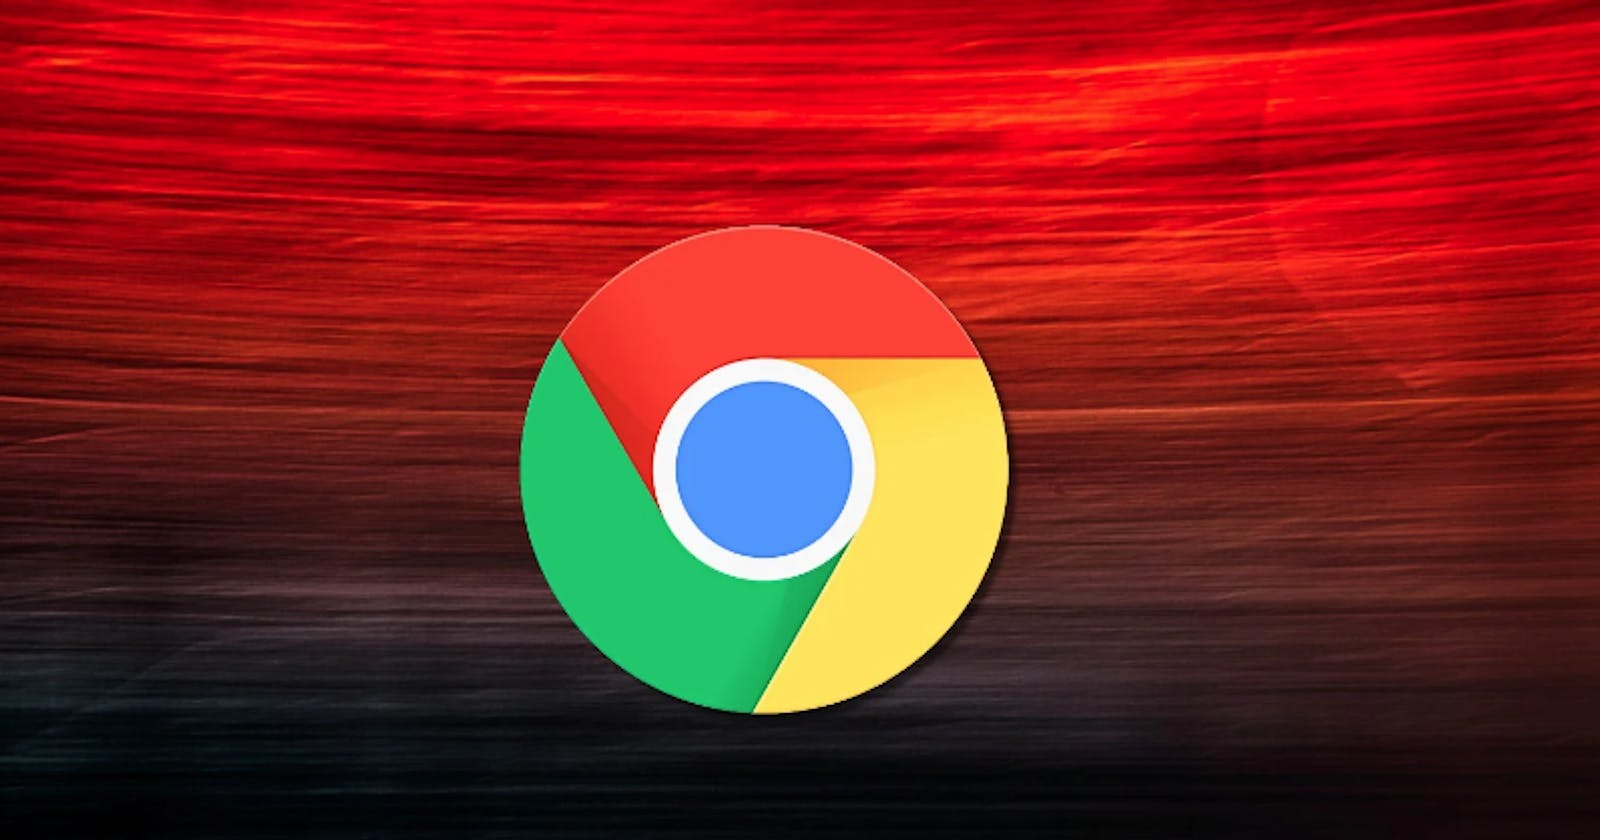 ALERT: Immediate Action Required – Update Google Chrome Now to Address Zero-Day Vulnerability